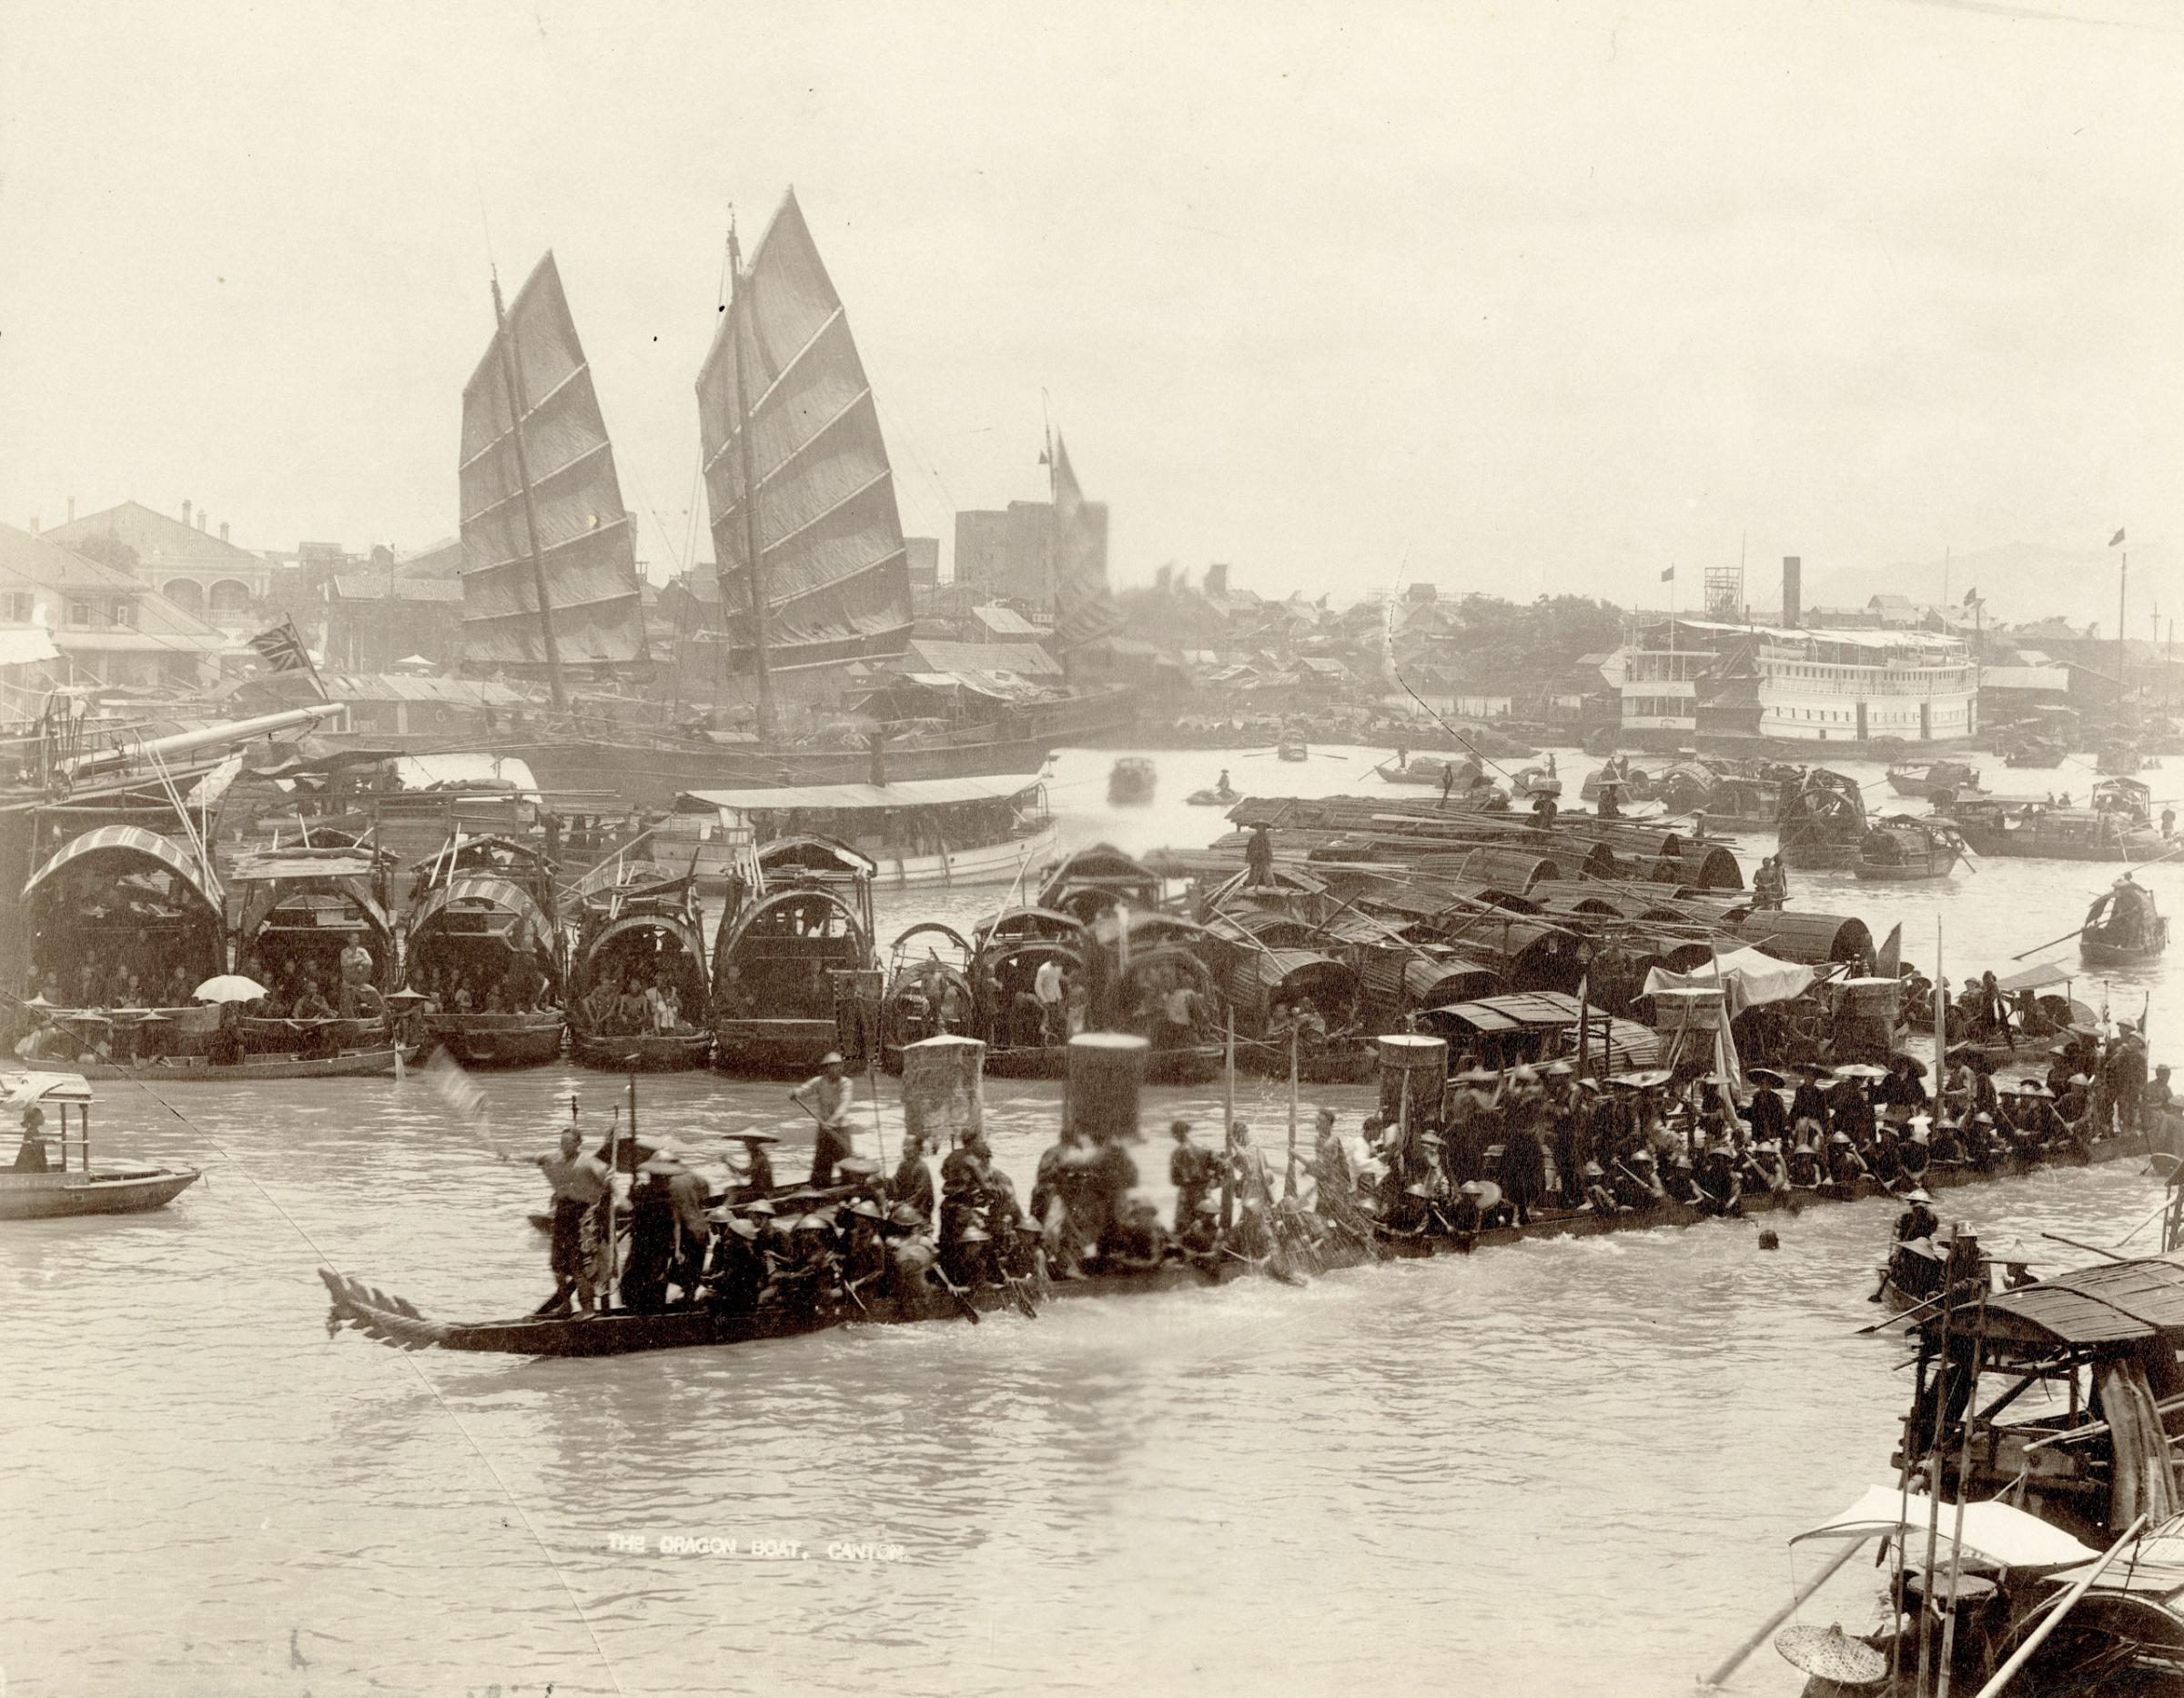 Rare early masterpieces of Chinese photography.